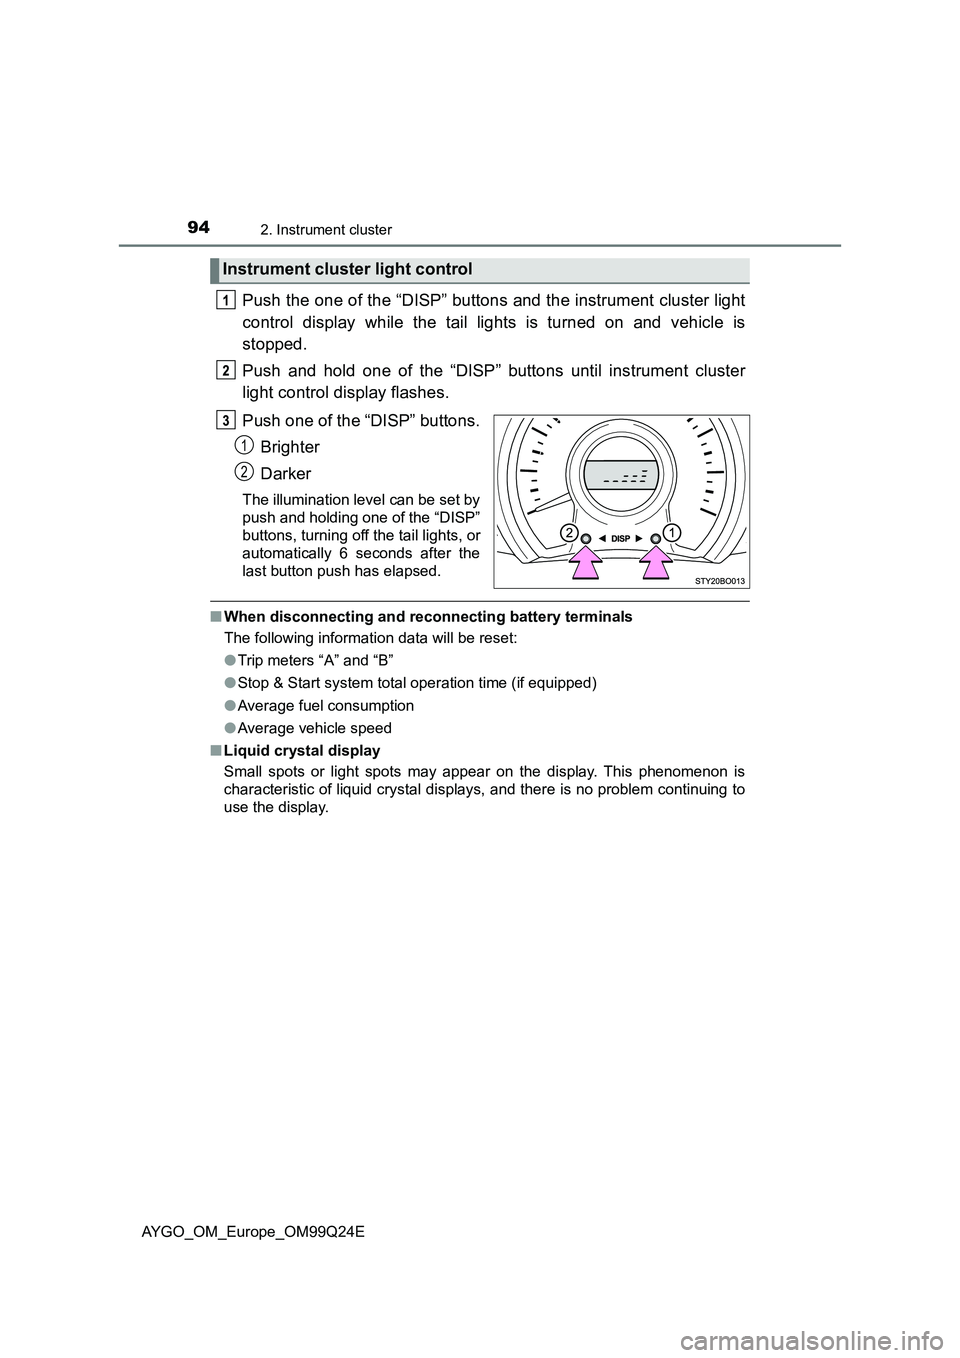 TOYOTA AYGO 2017  Owners Manual (in English) 942. Instrument cluster
AYGO_OM_Europe_OM99Q24E
Push the one of the “DISP” buttons and the instrument cluster light 
control display while the tail lights is turned on and vehicle is 
stopped. 
Pu